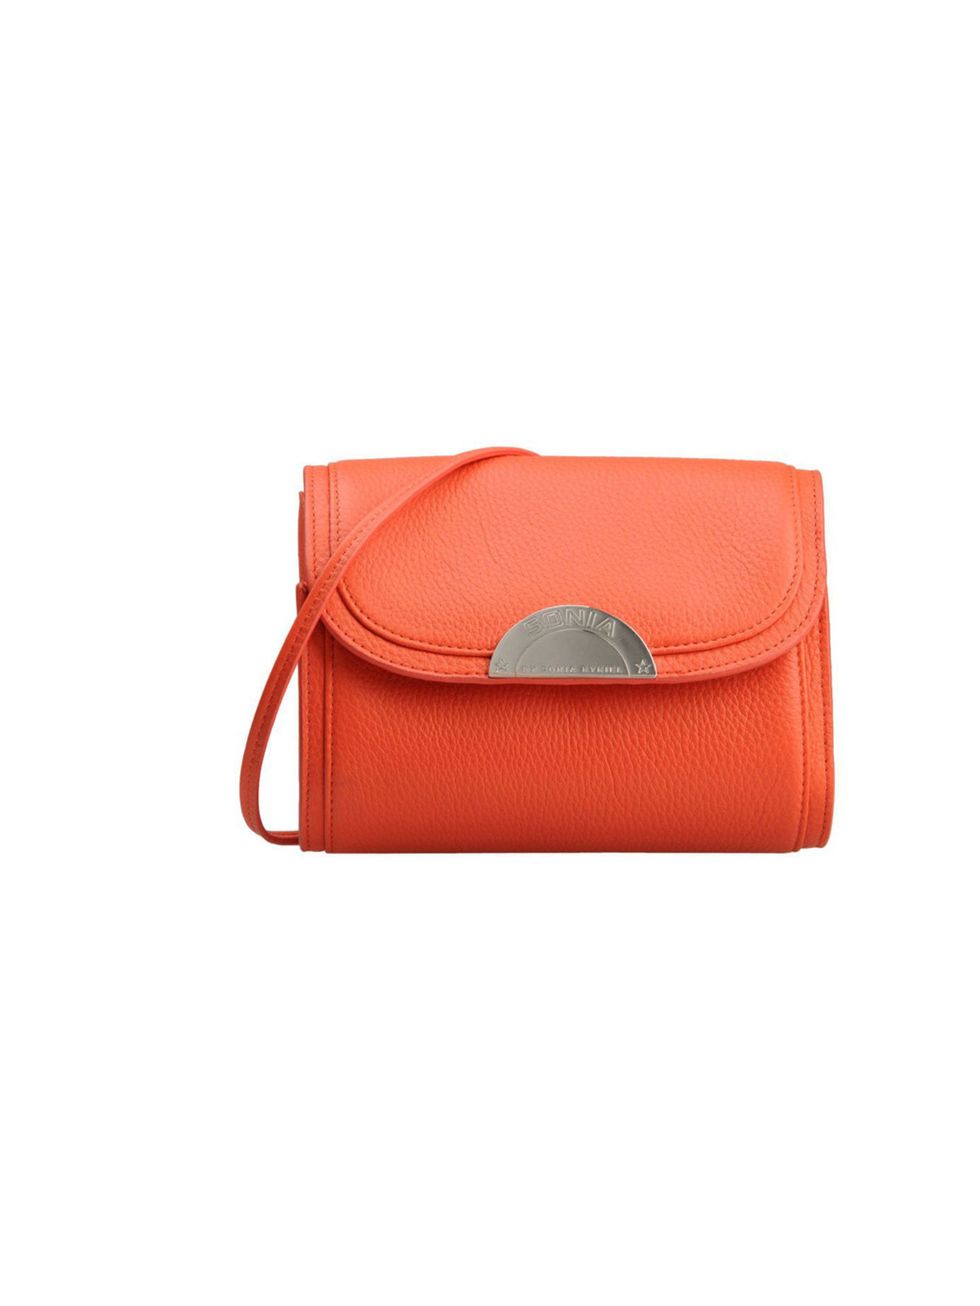 <p>If the orange buttery-textured leather wasn't enough to reel you in, this clever little bag has a removable strap which means you have a clutch and satchel all for the price of one.<a href="http://www.thecorner.com/gb/women/small-leather-bag_cod4519481